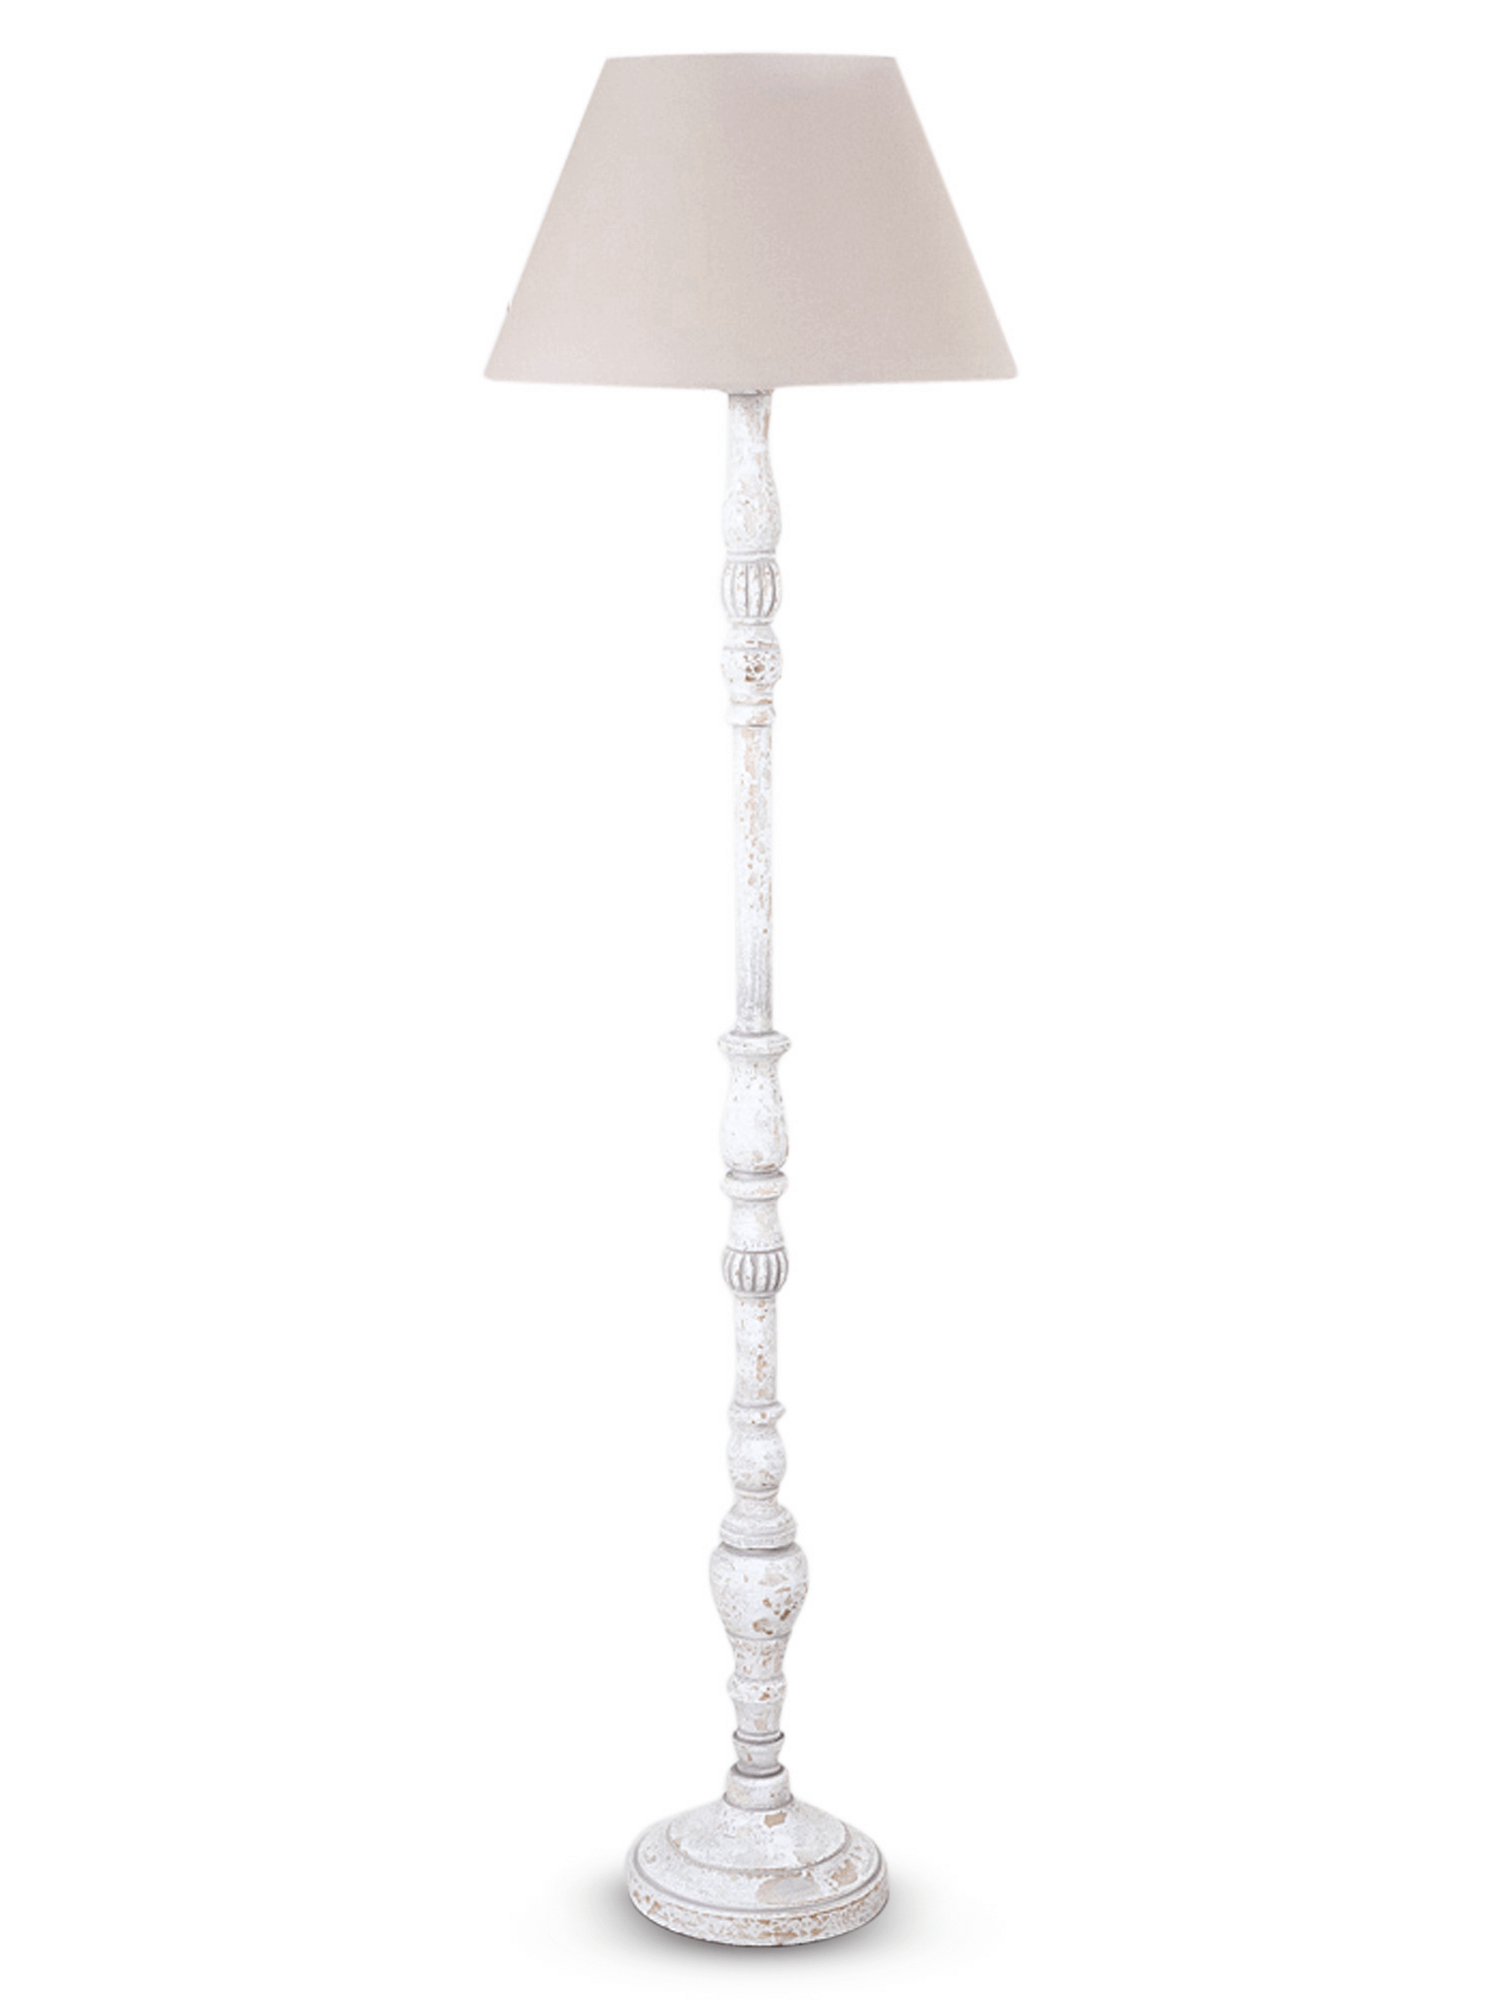 White wooden floor lamp - feeling of symmetry and fulfillment - Warisan